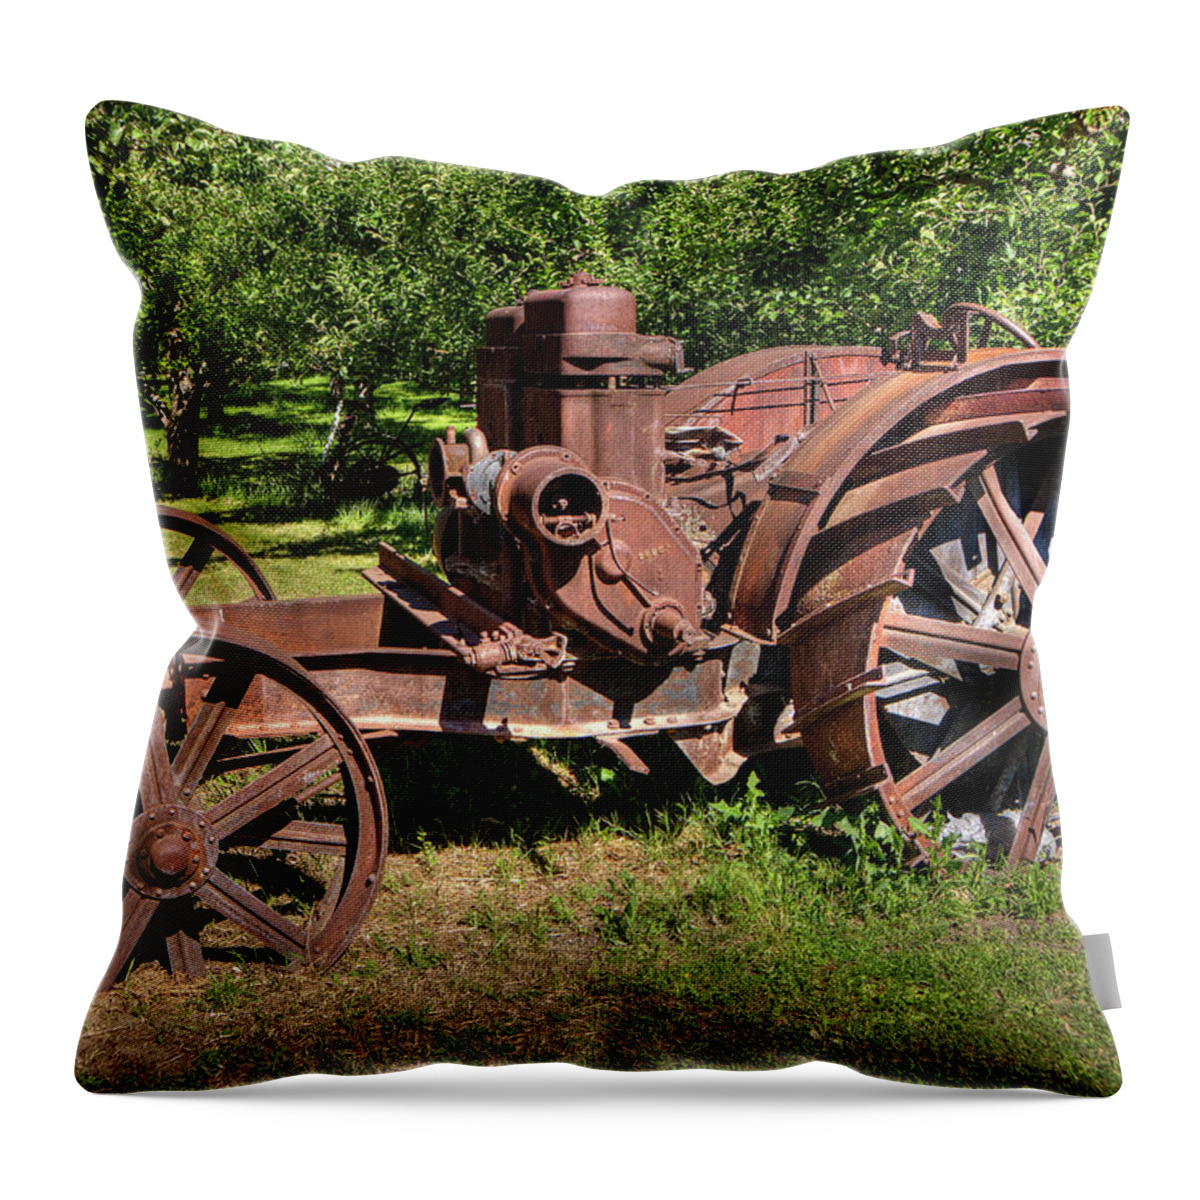 Vintage Tractor Throw Pillow featuring the photograph Tractor 3 by Doug Matthews